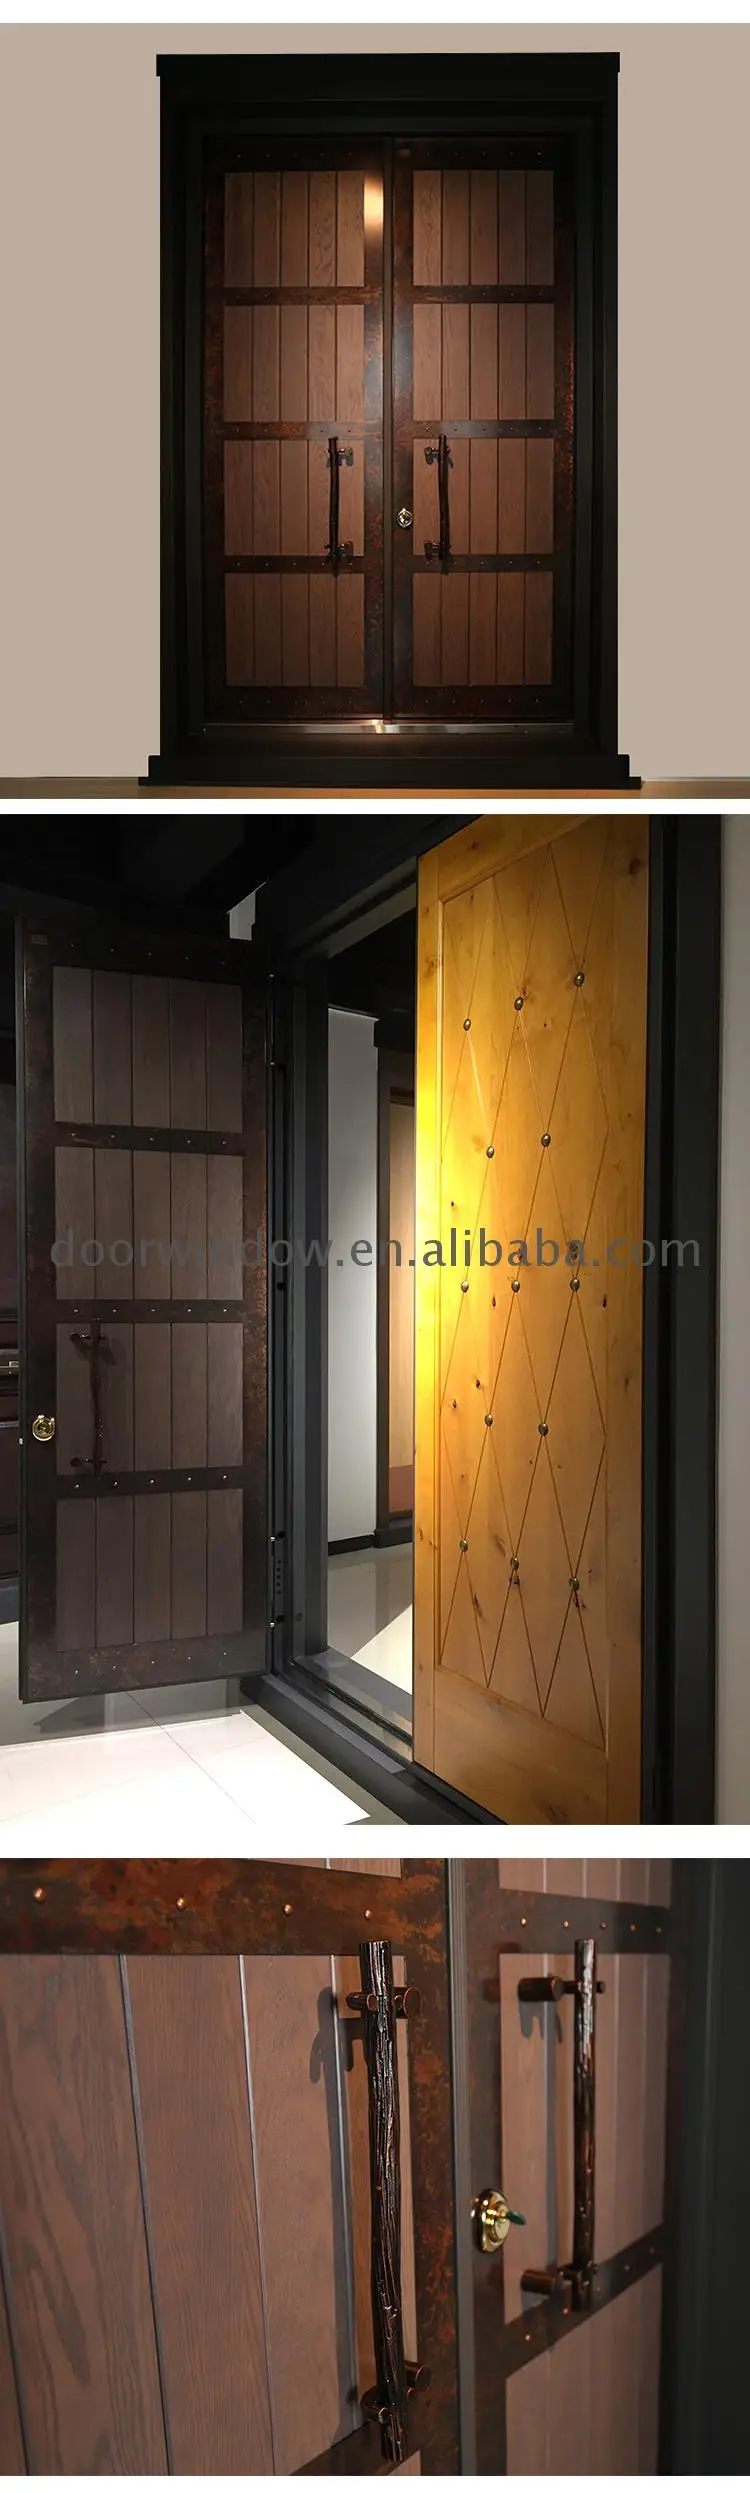 Wholesale price solid oak panel doors front for sale homes